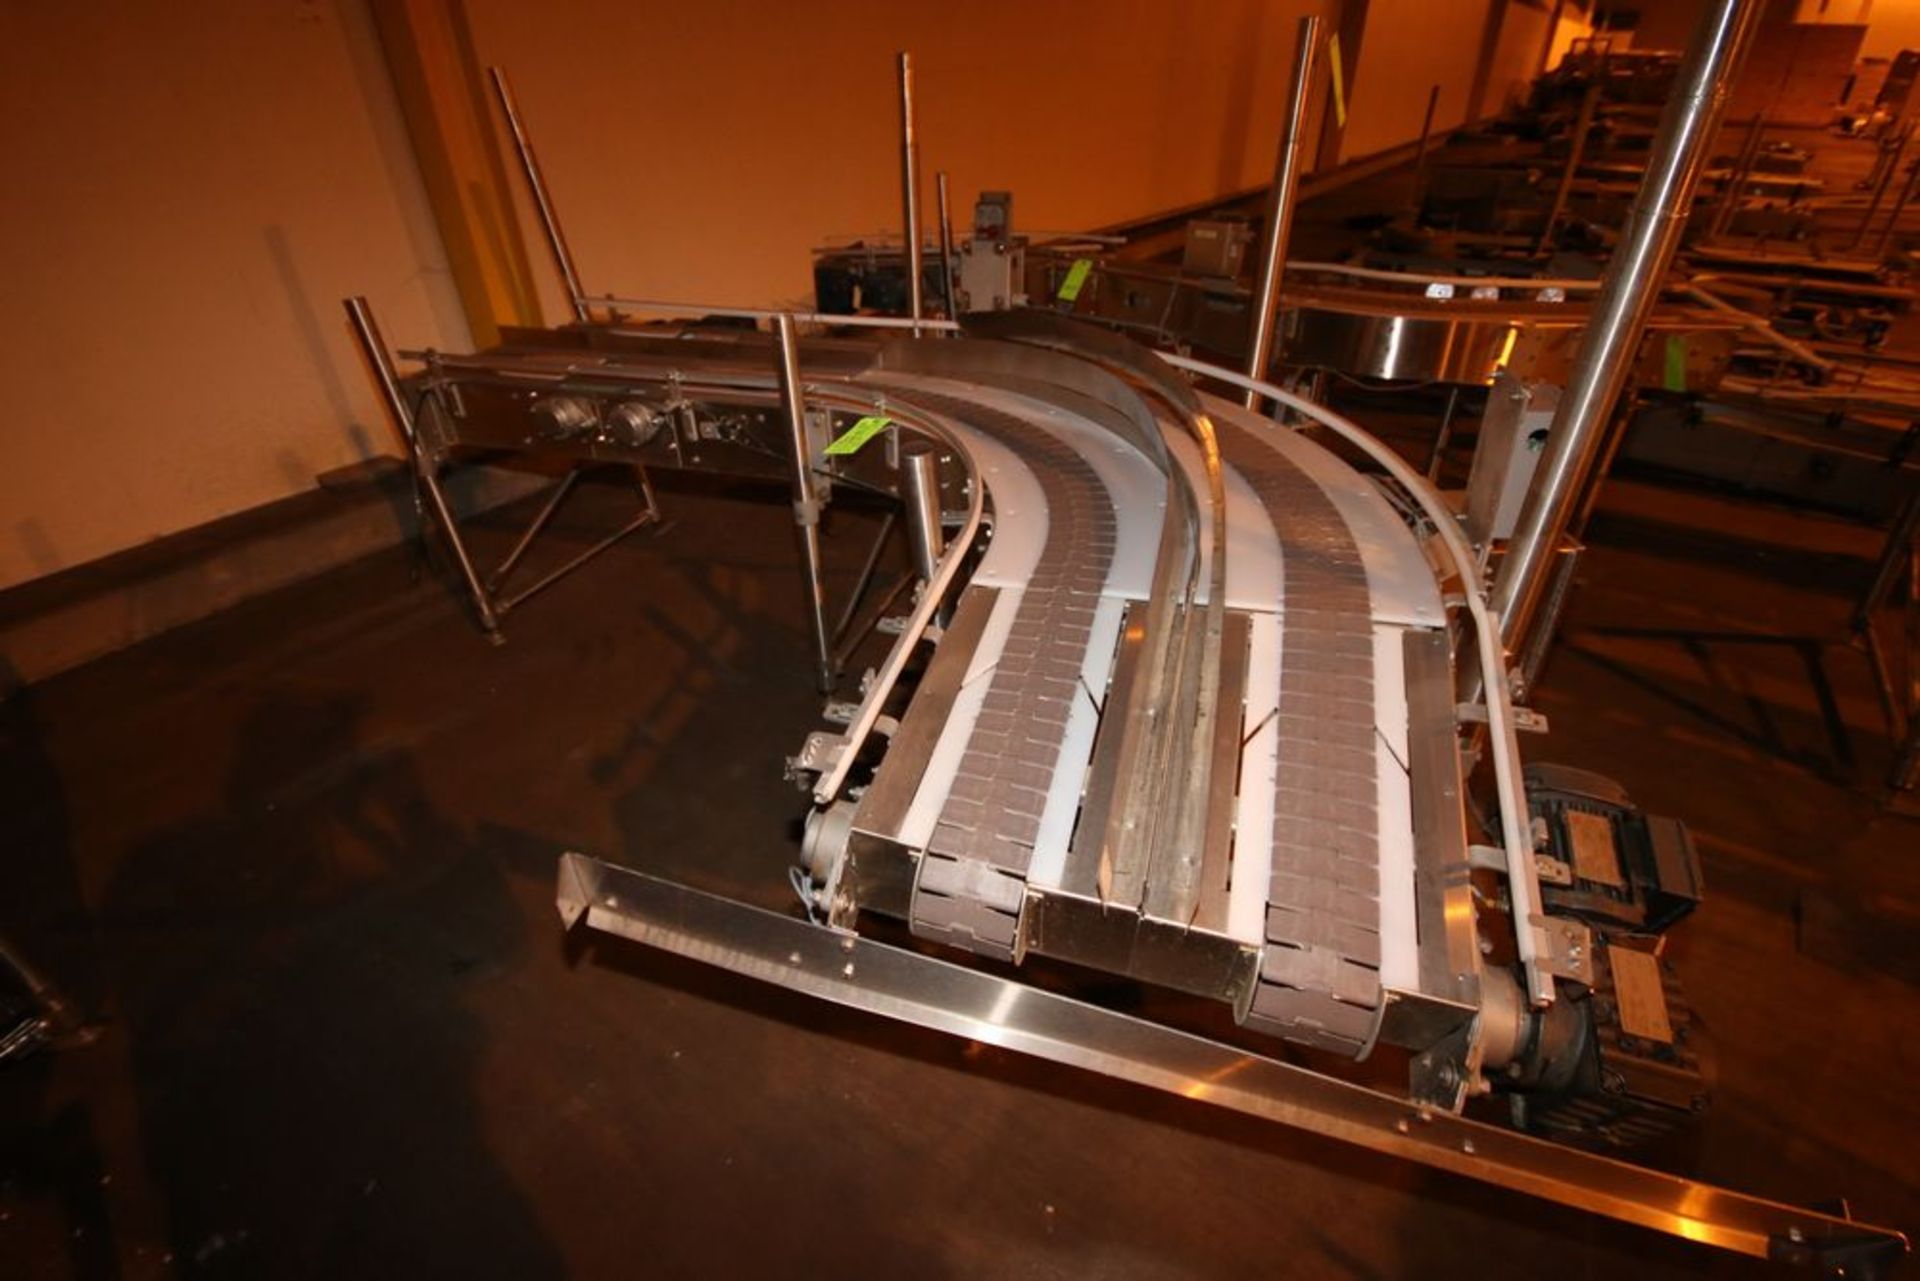 4-Sections of Sidel & Nercon 2-Lane Curved S/S Conveyor, with Drives, 1-Section Includes Dual Lane - Image 5 of 6